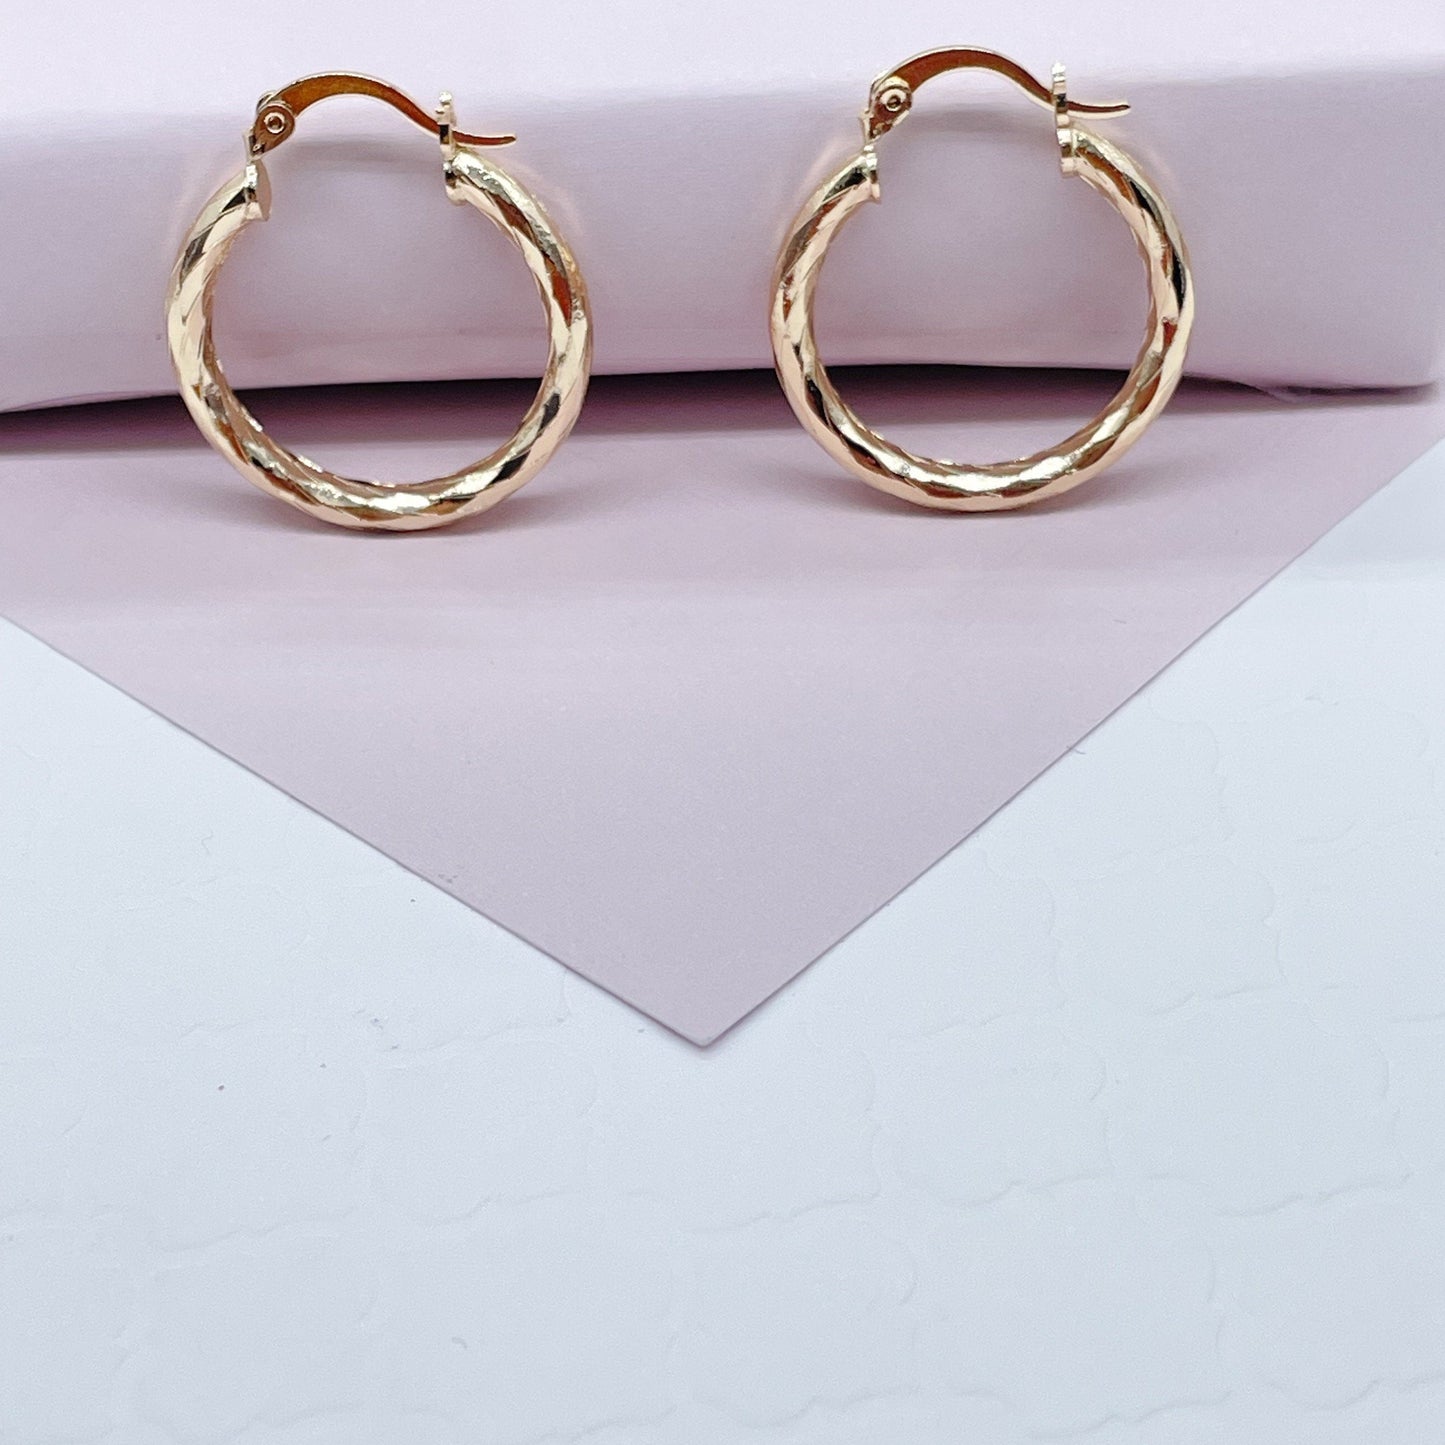 18k Gold Layered Small Diamond Textured Hoops Earrings Available in 25mm For